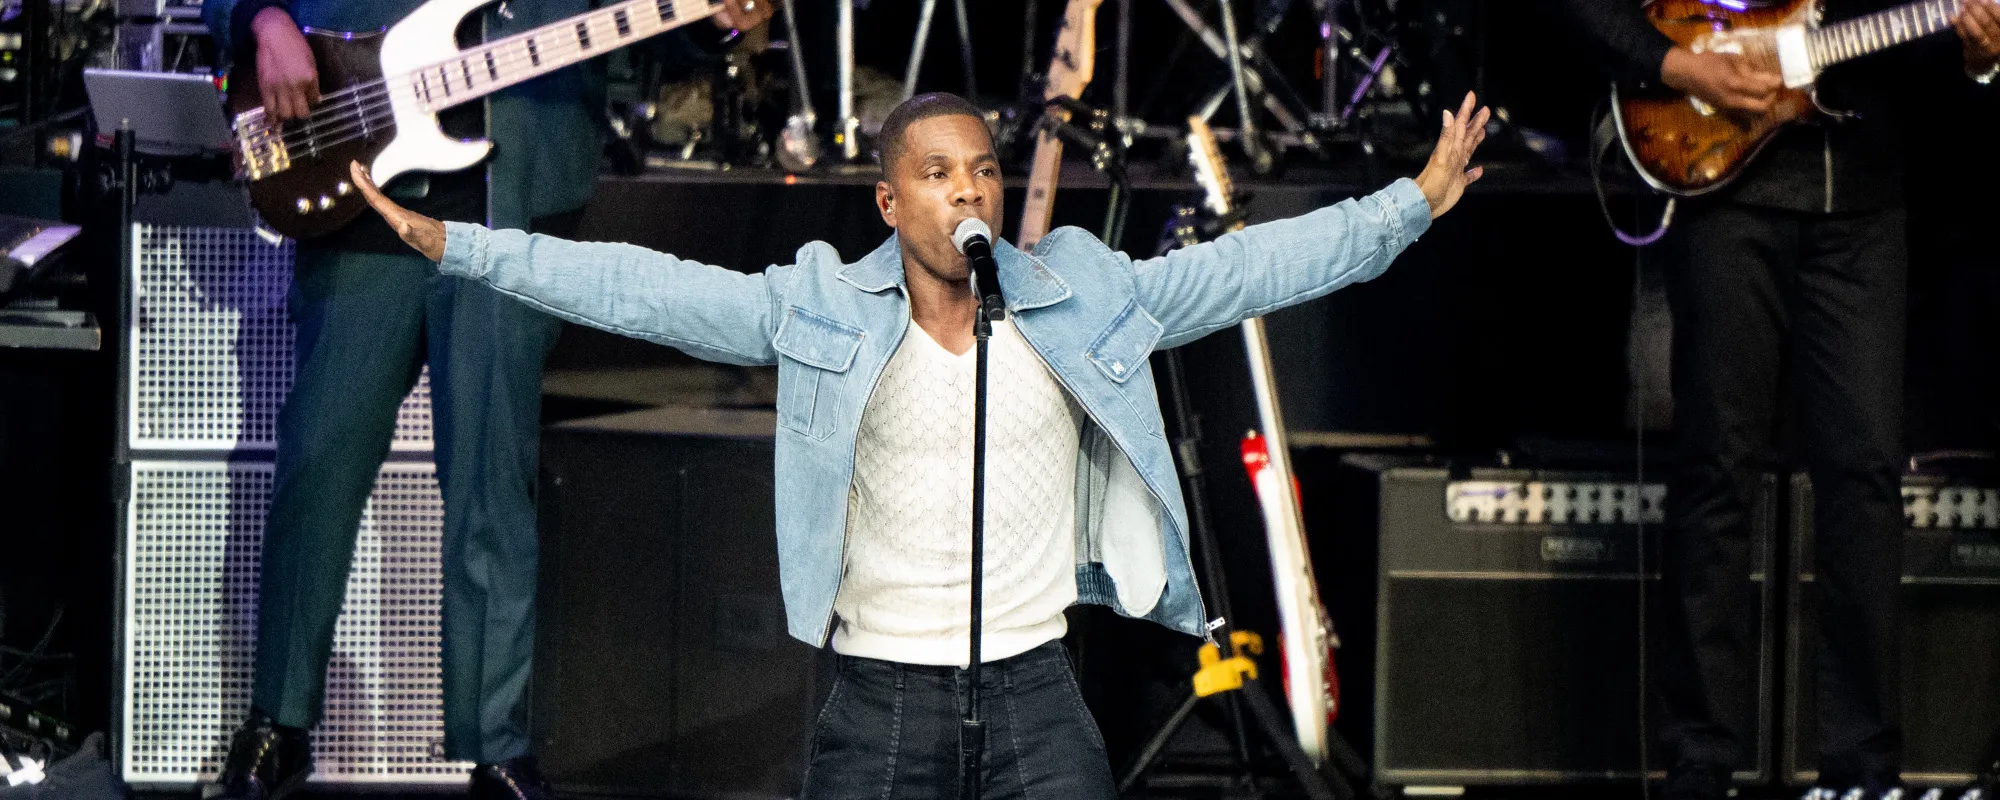 Kirk Franklin Ties Record on Gospel Chart with “All Things”